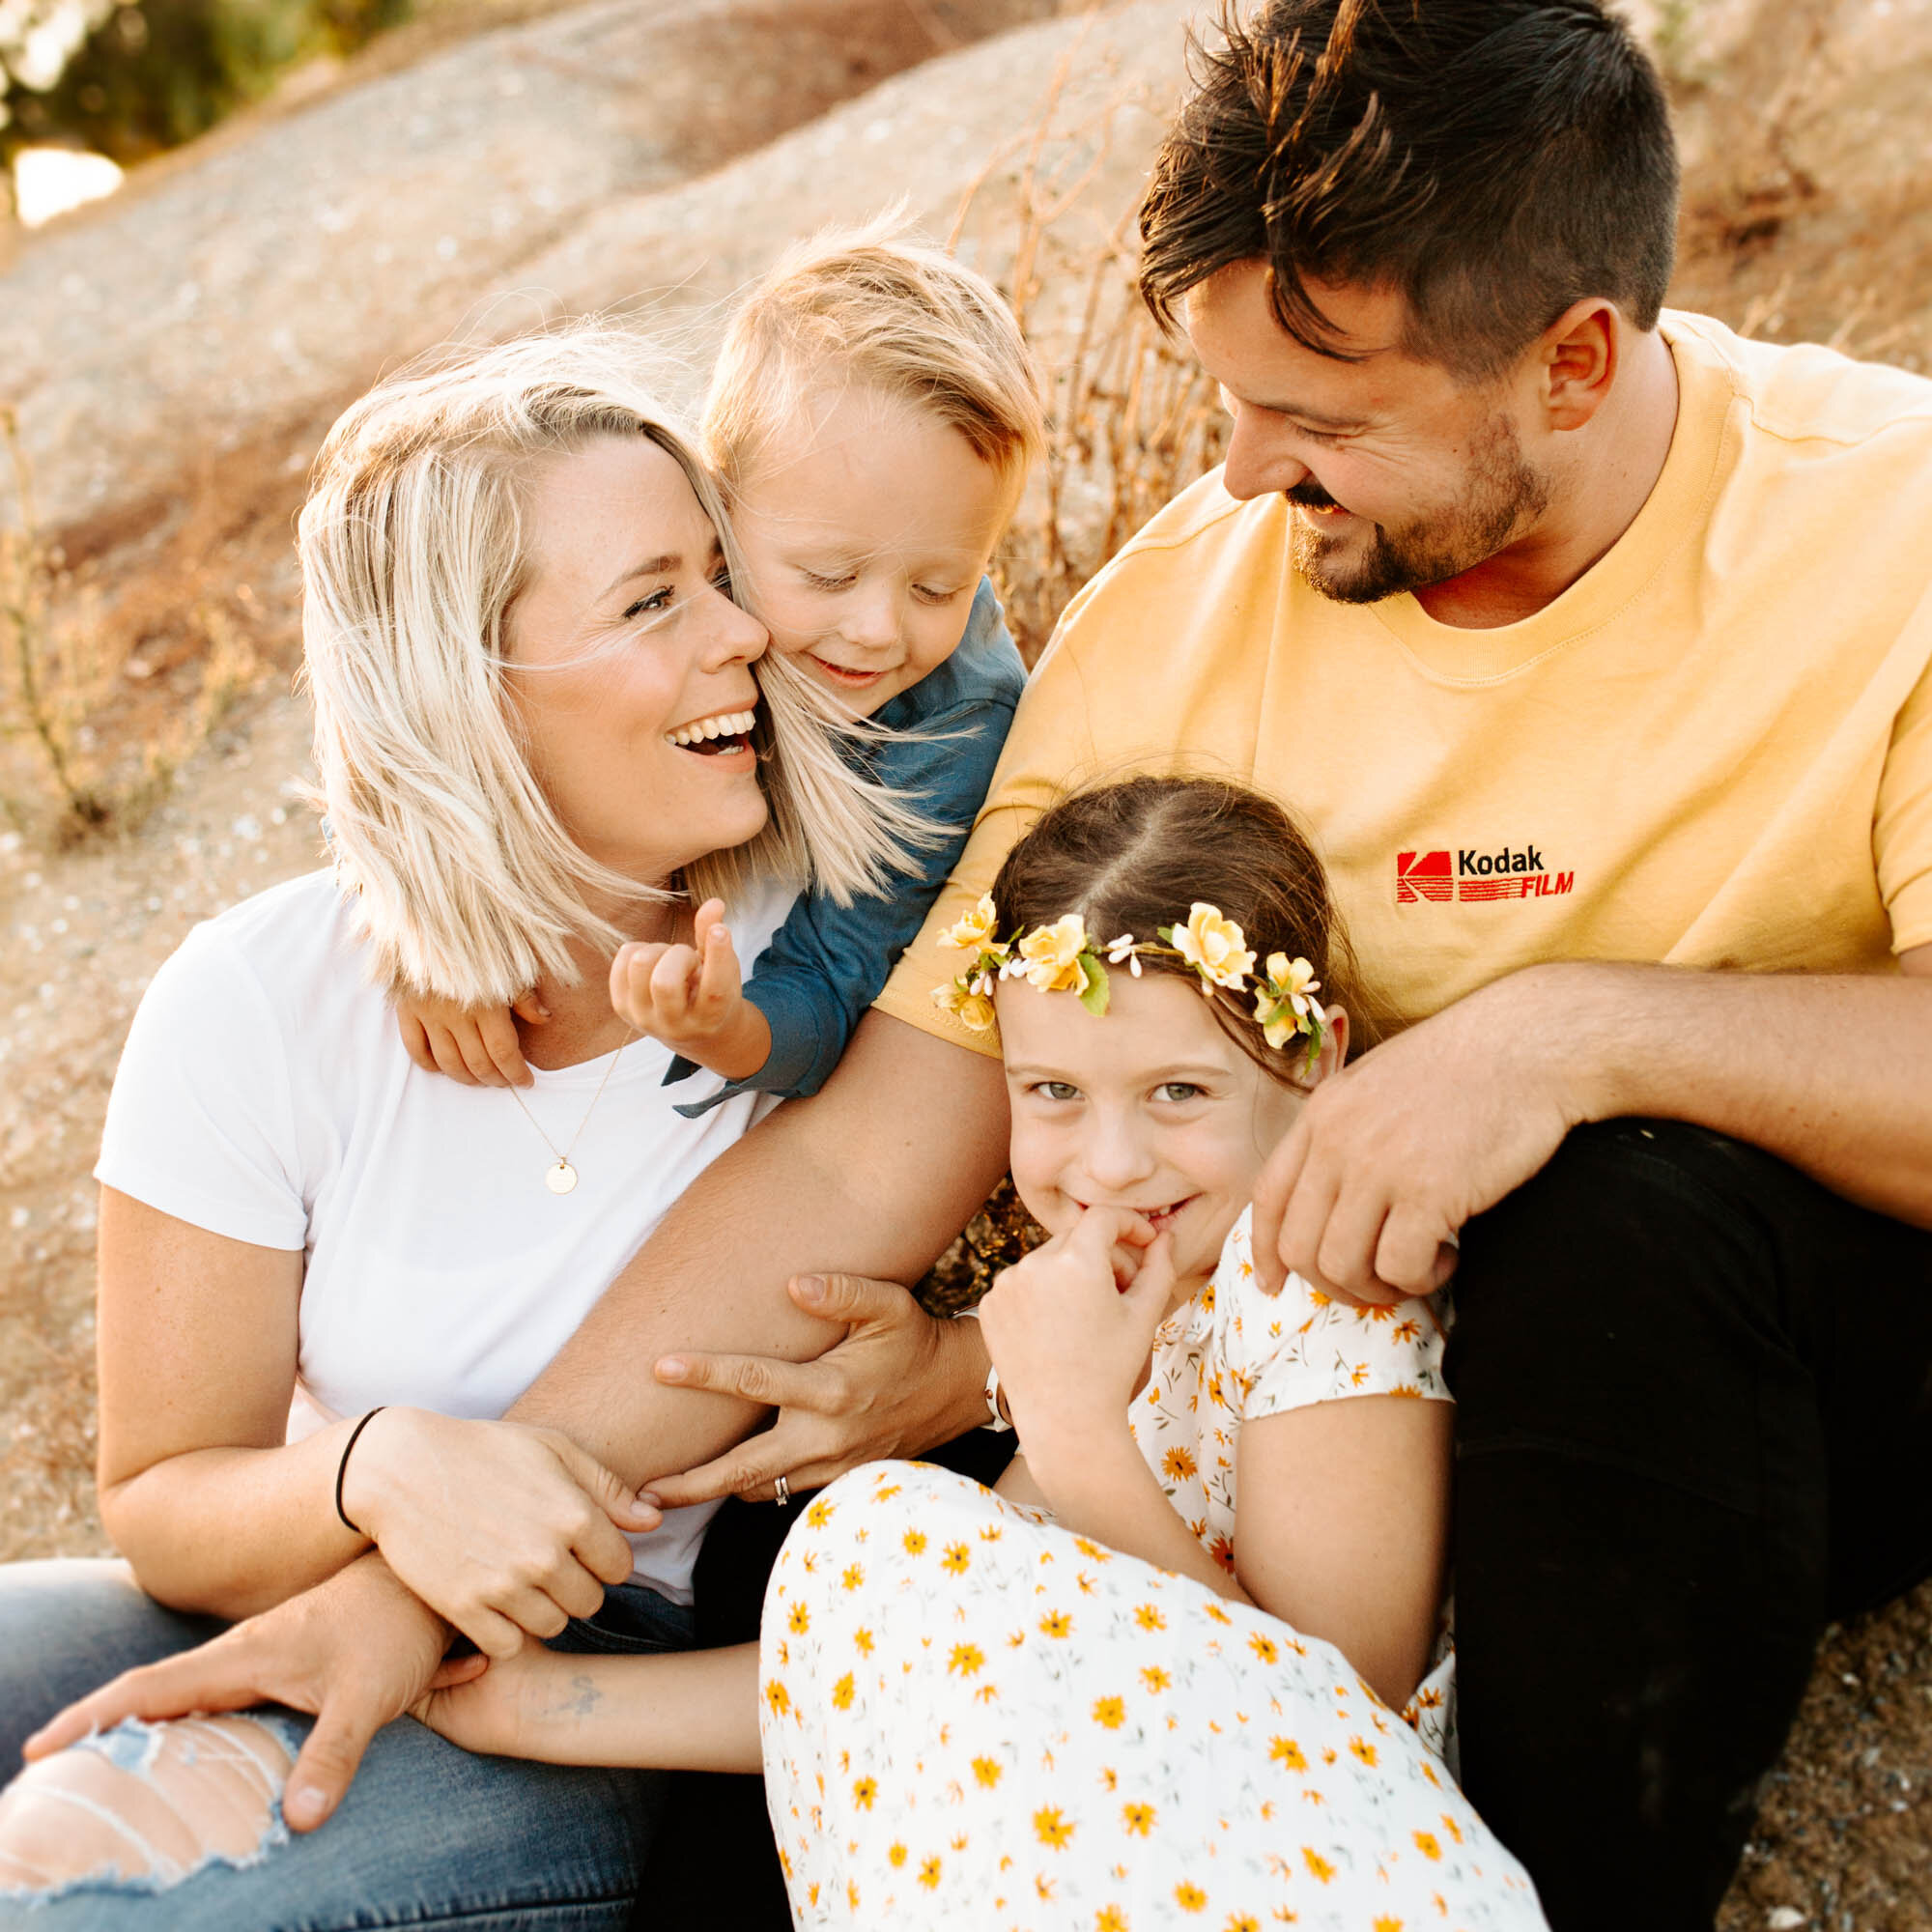 fam wedding weddings family families child children pregnancy newborn baby new baby pregnant adelaide south australia candid fun happy bright colourful married engagement engaged proposal propose ring_019.jpg